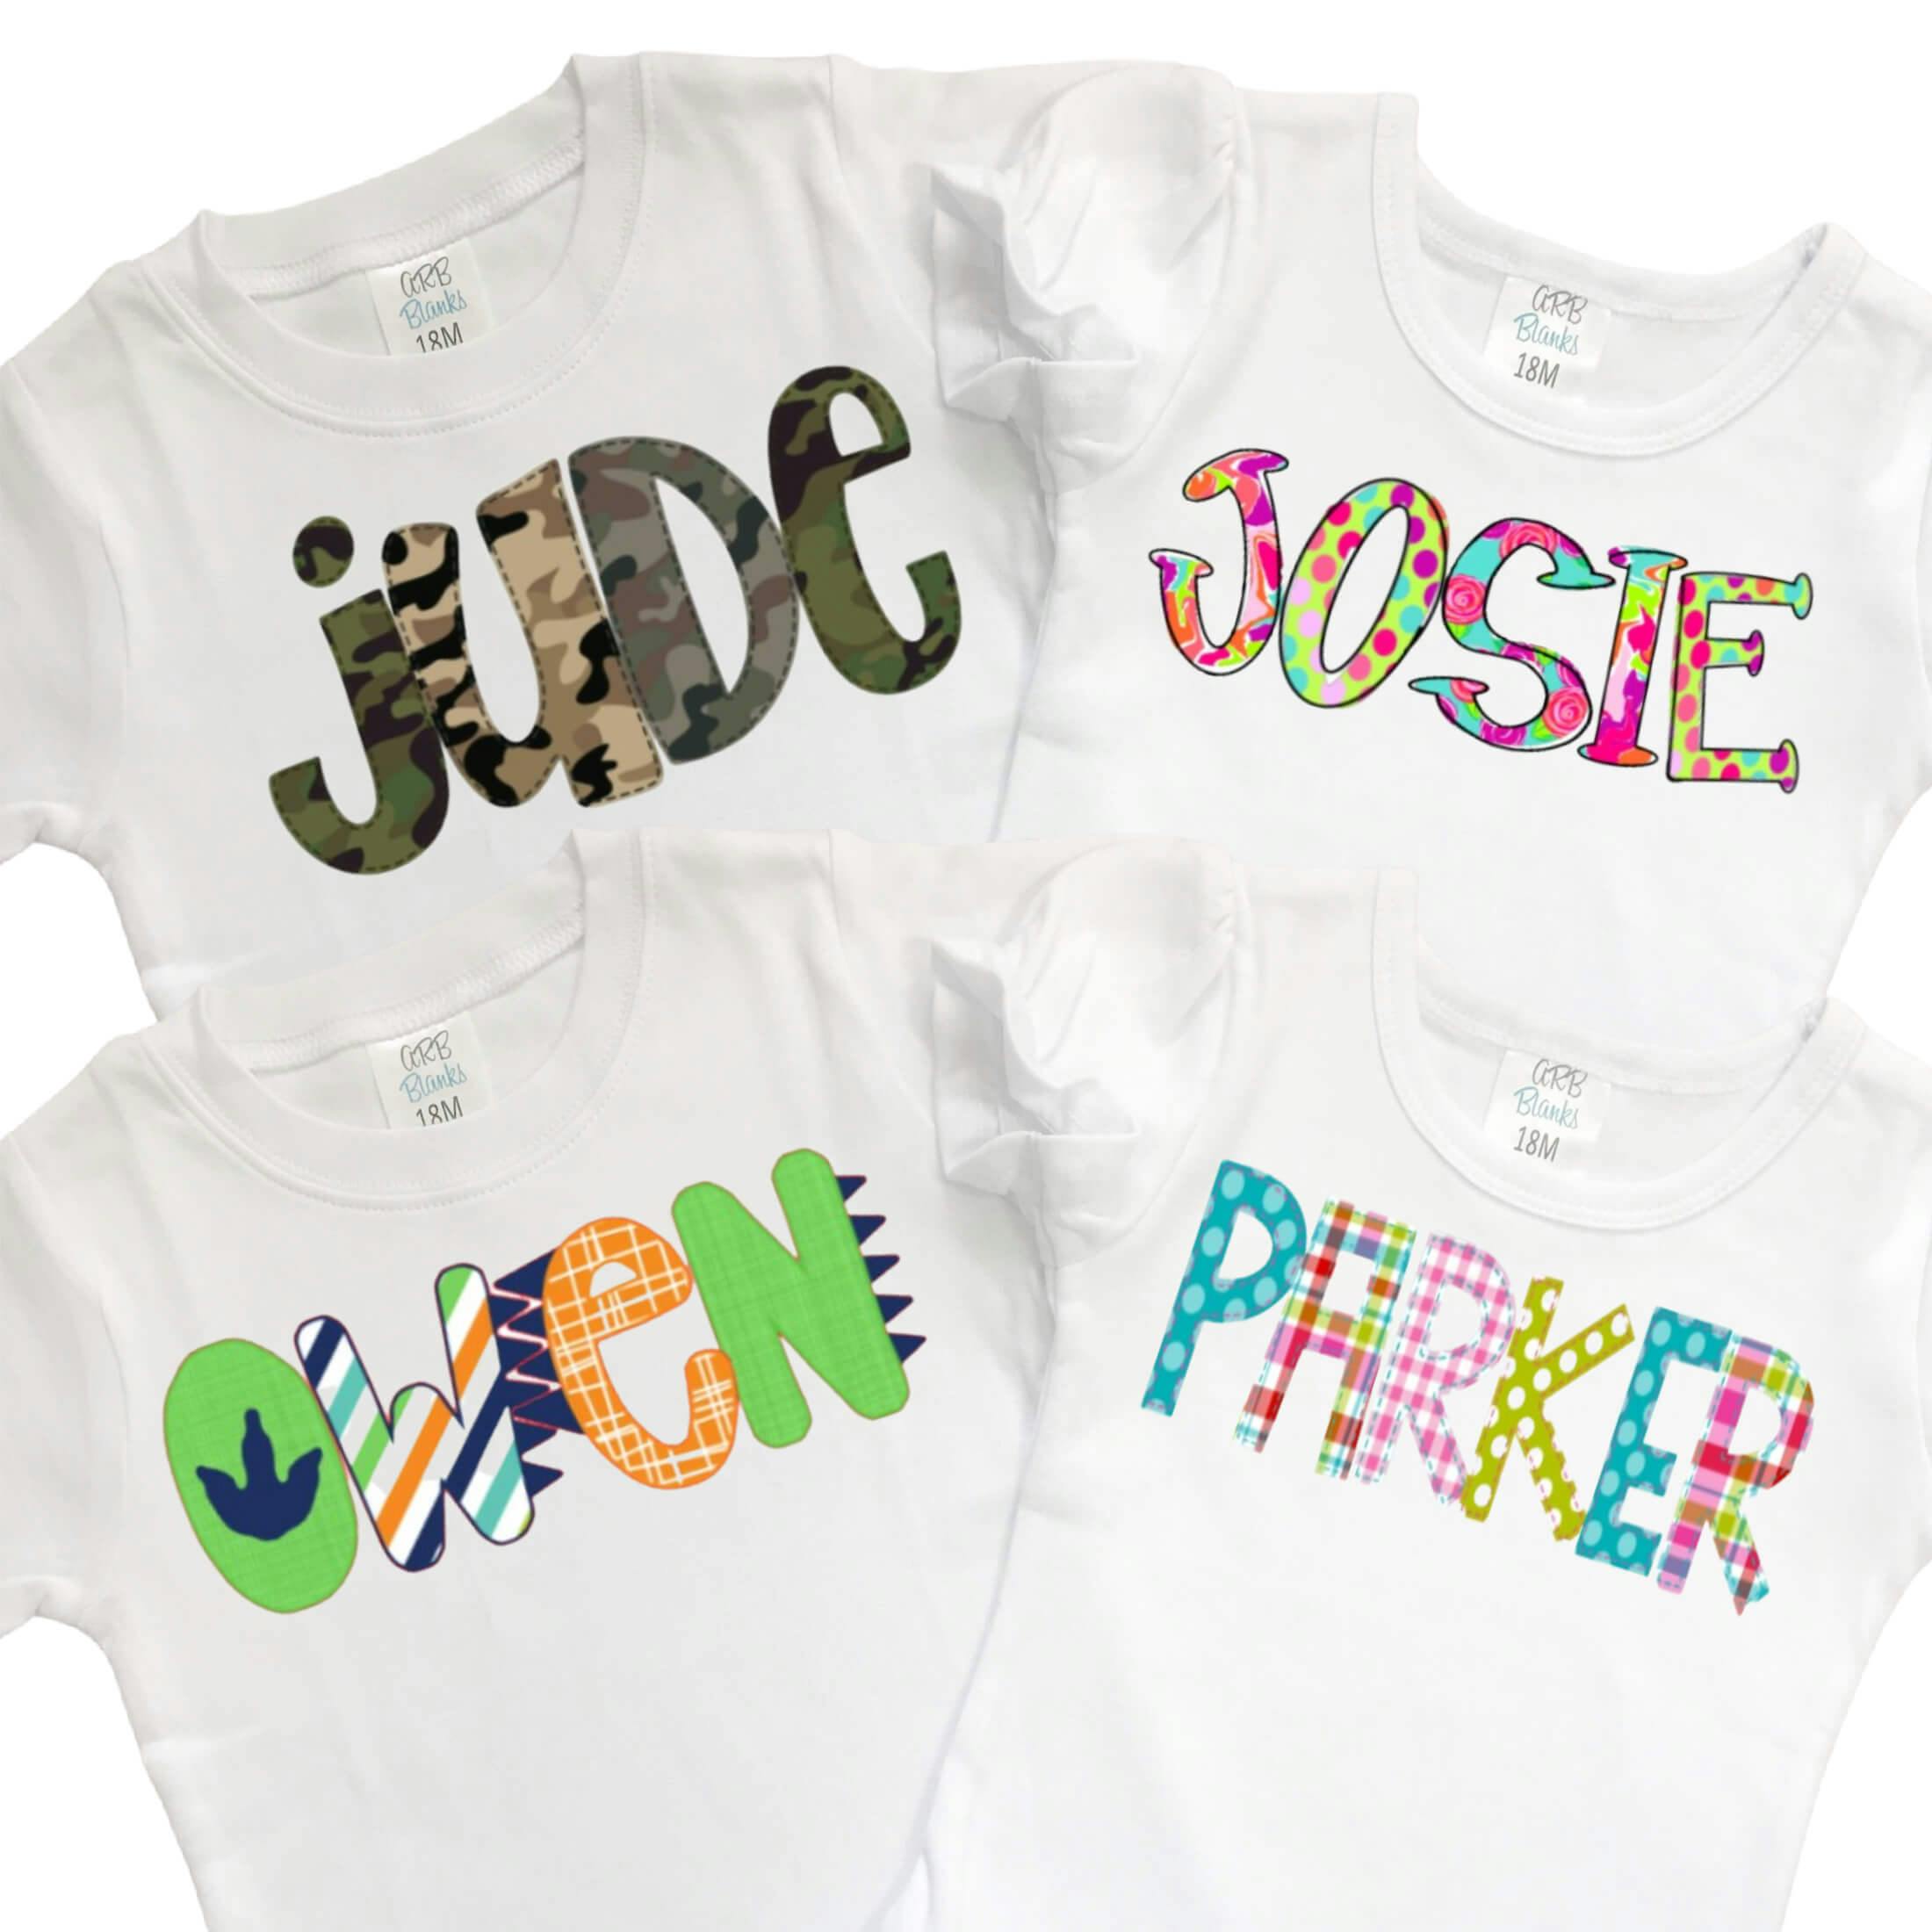 Kids Name Tee Short or Long Sleeve - undefined - The Sassy Seamstress